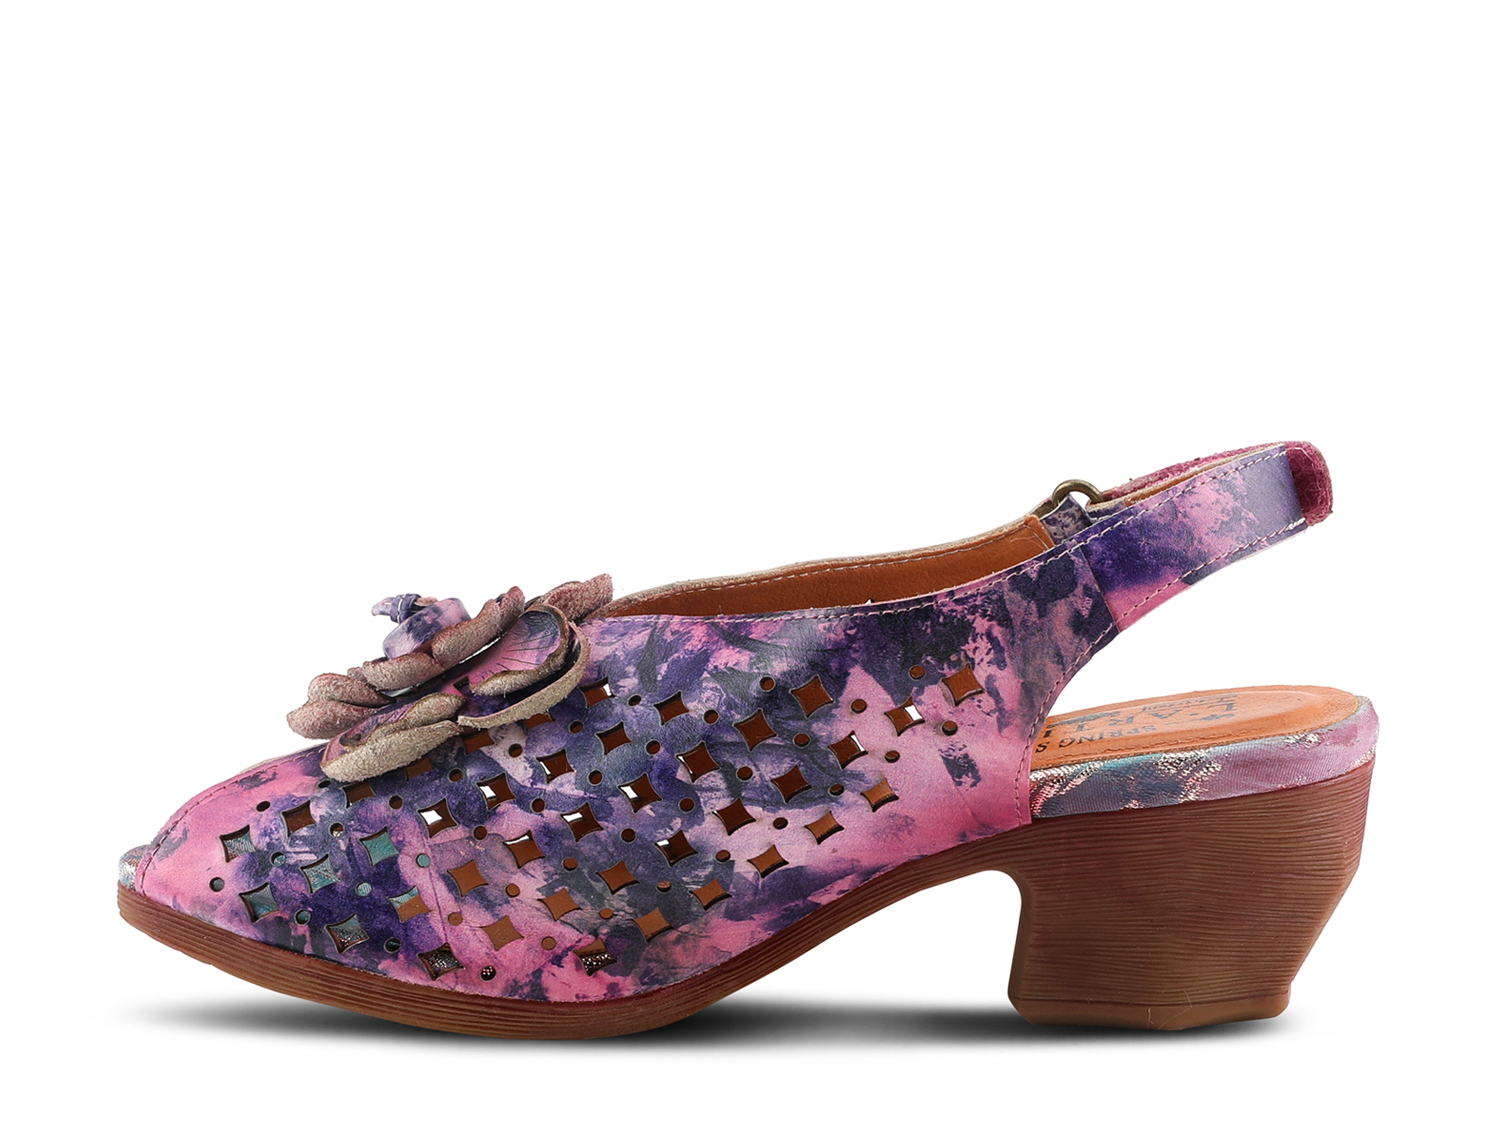 Get the latest L'ARTISTE VIENROSE-FLEUR SLINGBACK SANDALS L'ARTISTE  available at a Great Price